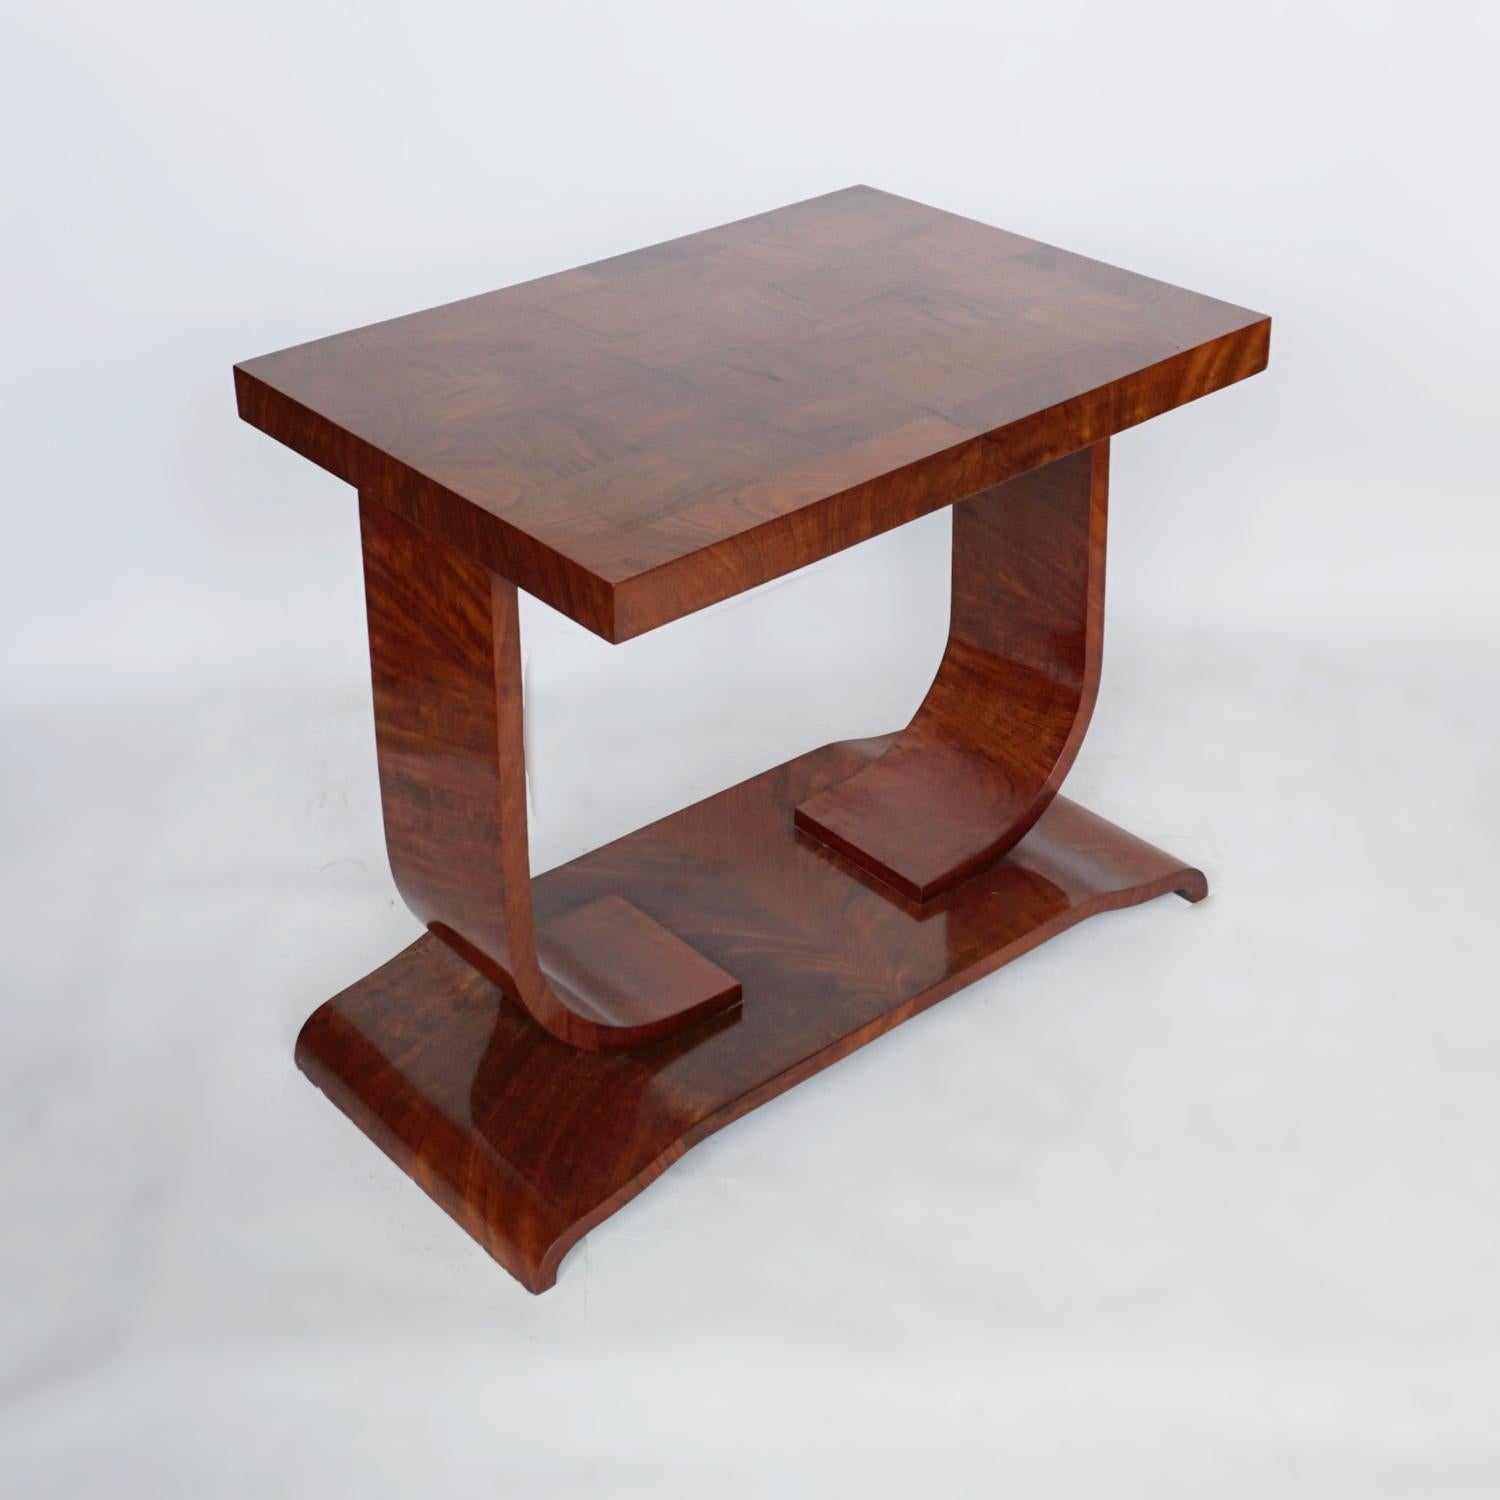 An Art Deco coffee/side table. Contrasting figured walnut grain creating a chequered effect to table top. Set over a U-shaped base. Figured walnut throughout. 

Dimensions: H 65cm W 70cm D 50cm

Origin: English

Date: Circa 1930

Item